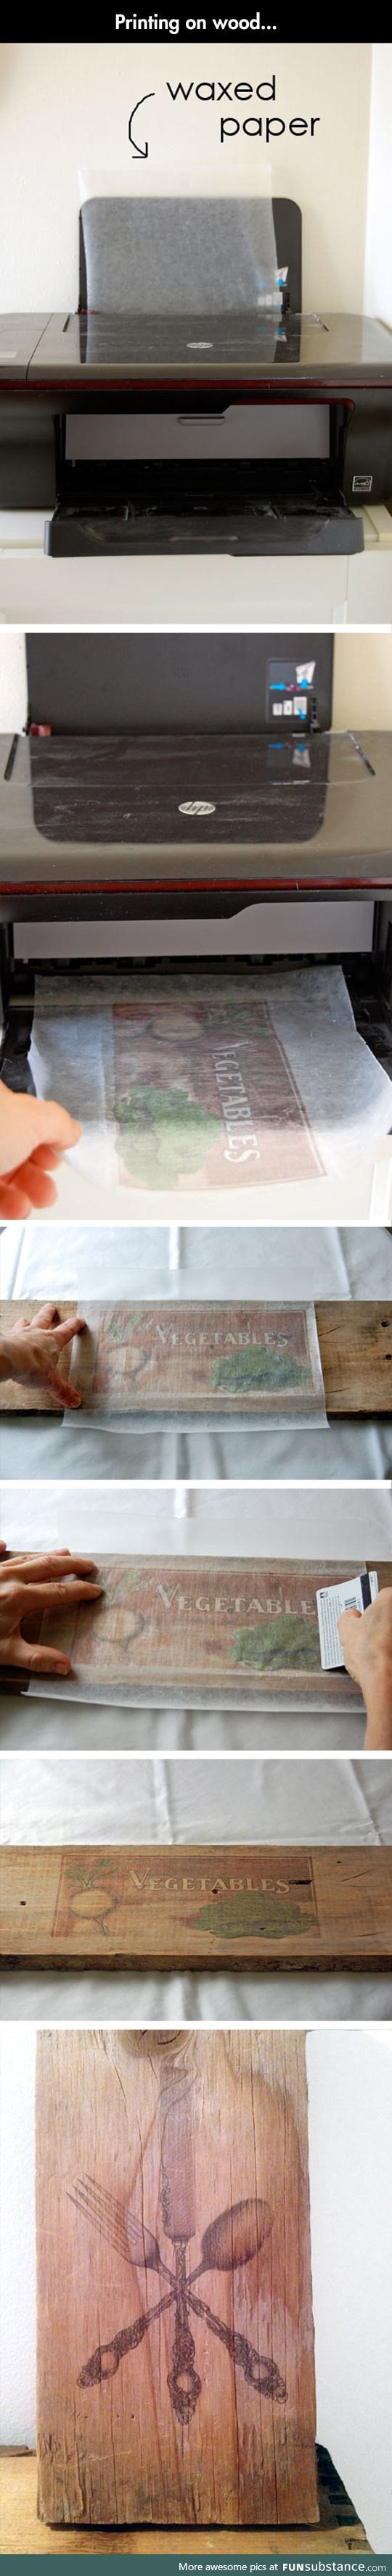 How to properly print on wood